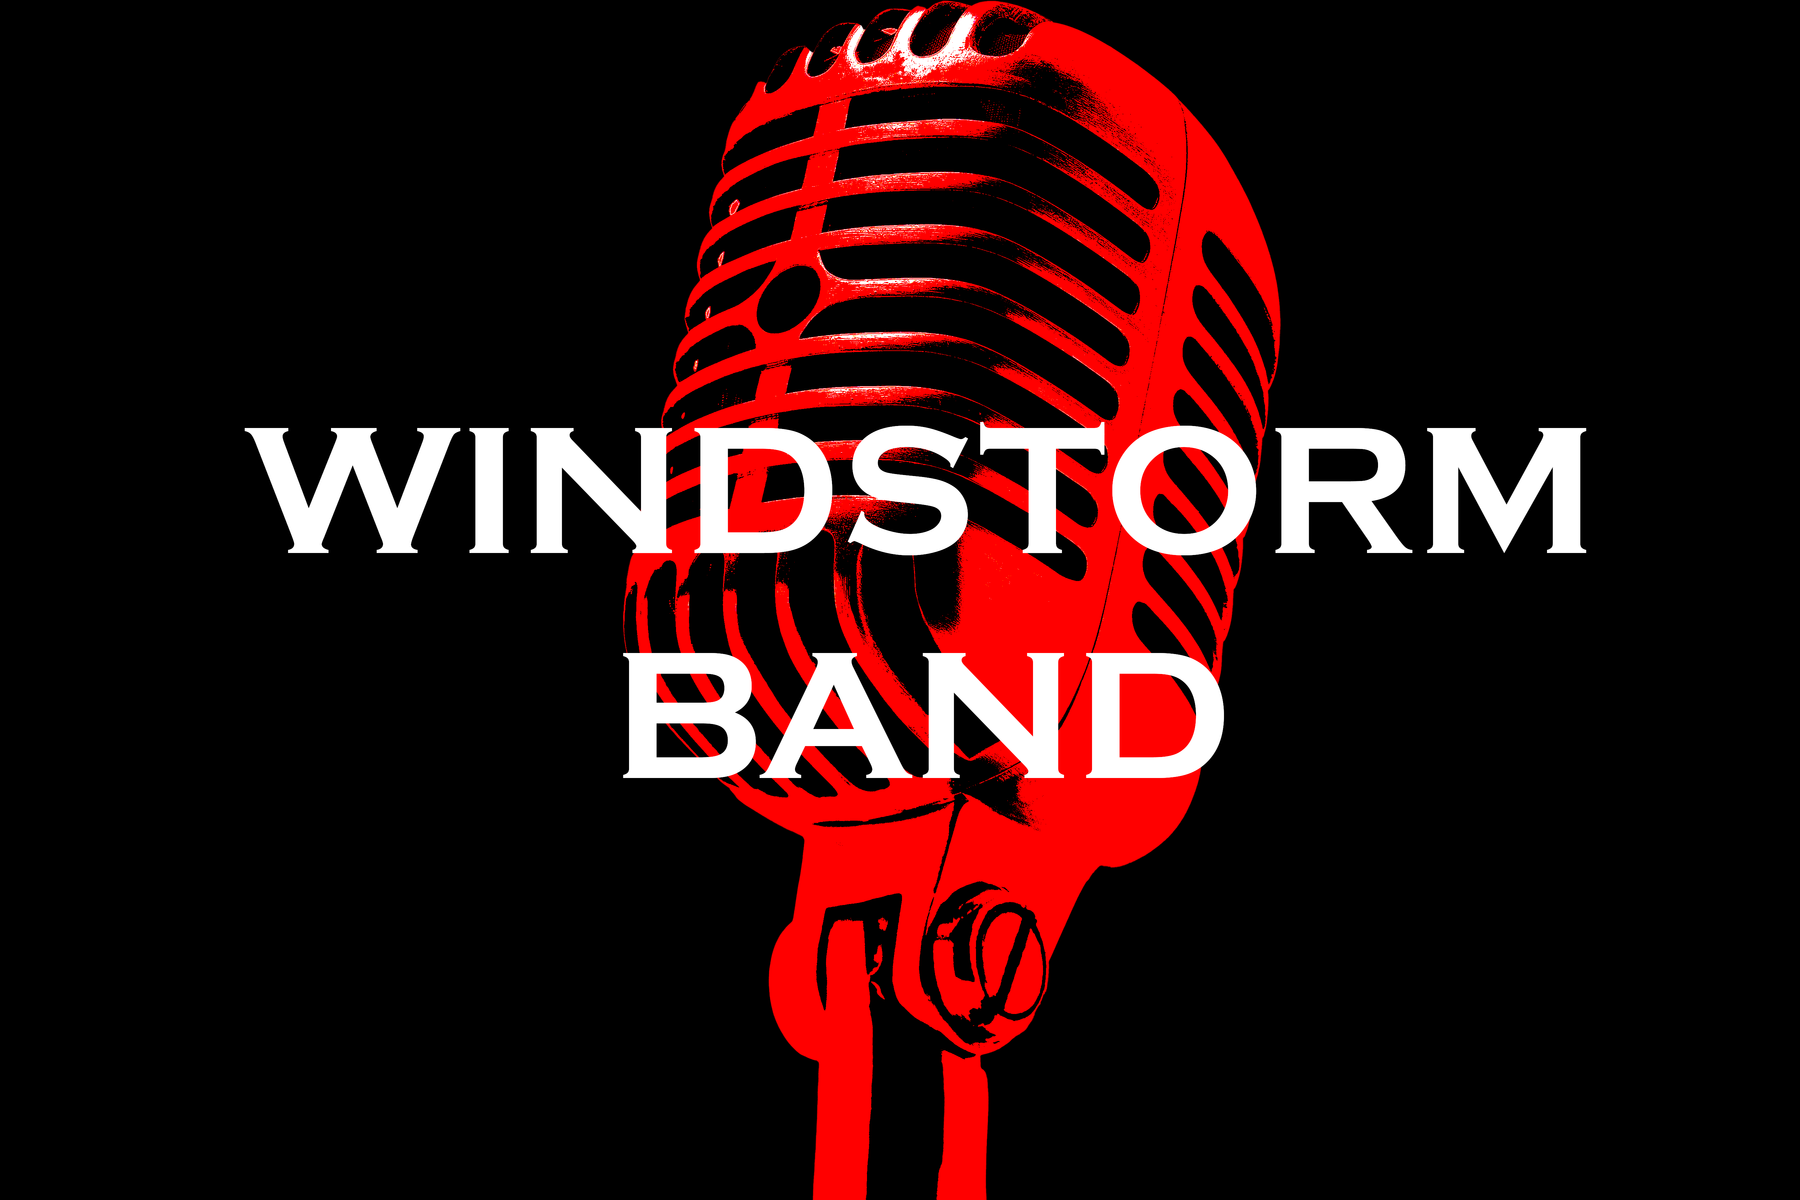 Wind Storm Band